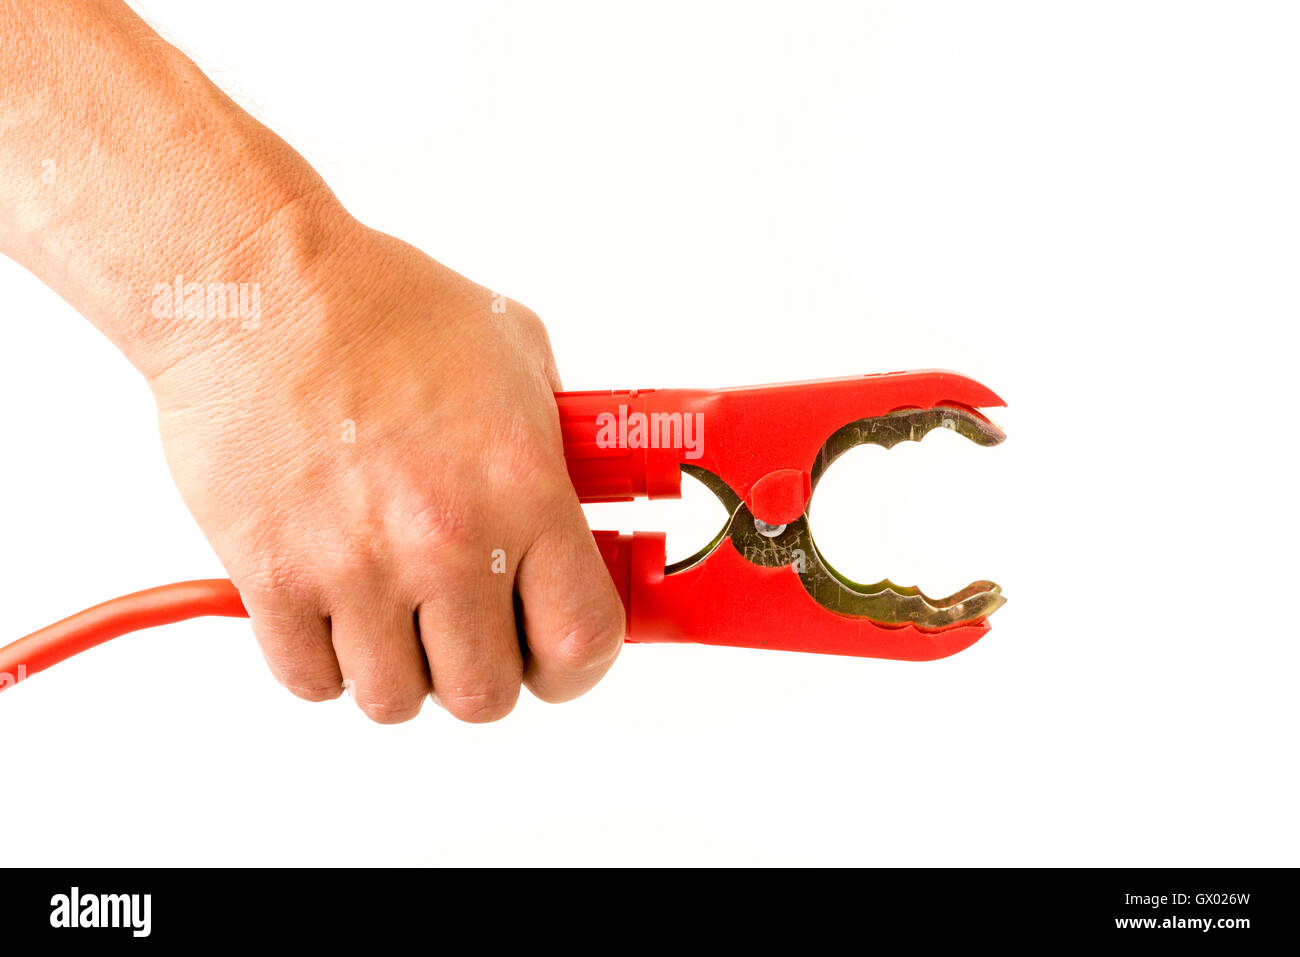 Male hand squeezing car positive red jump lead clamp open Stock Photo